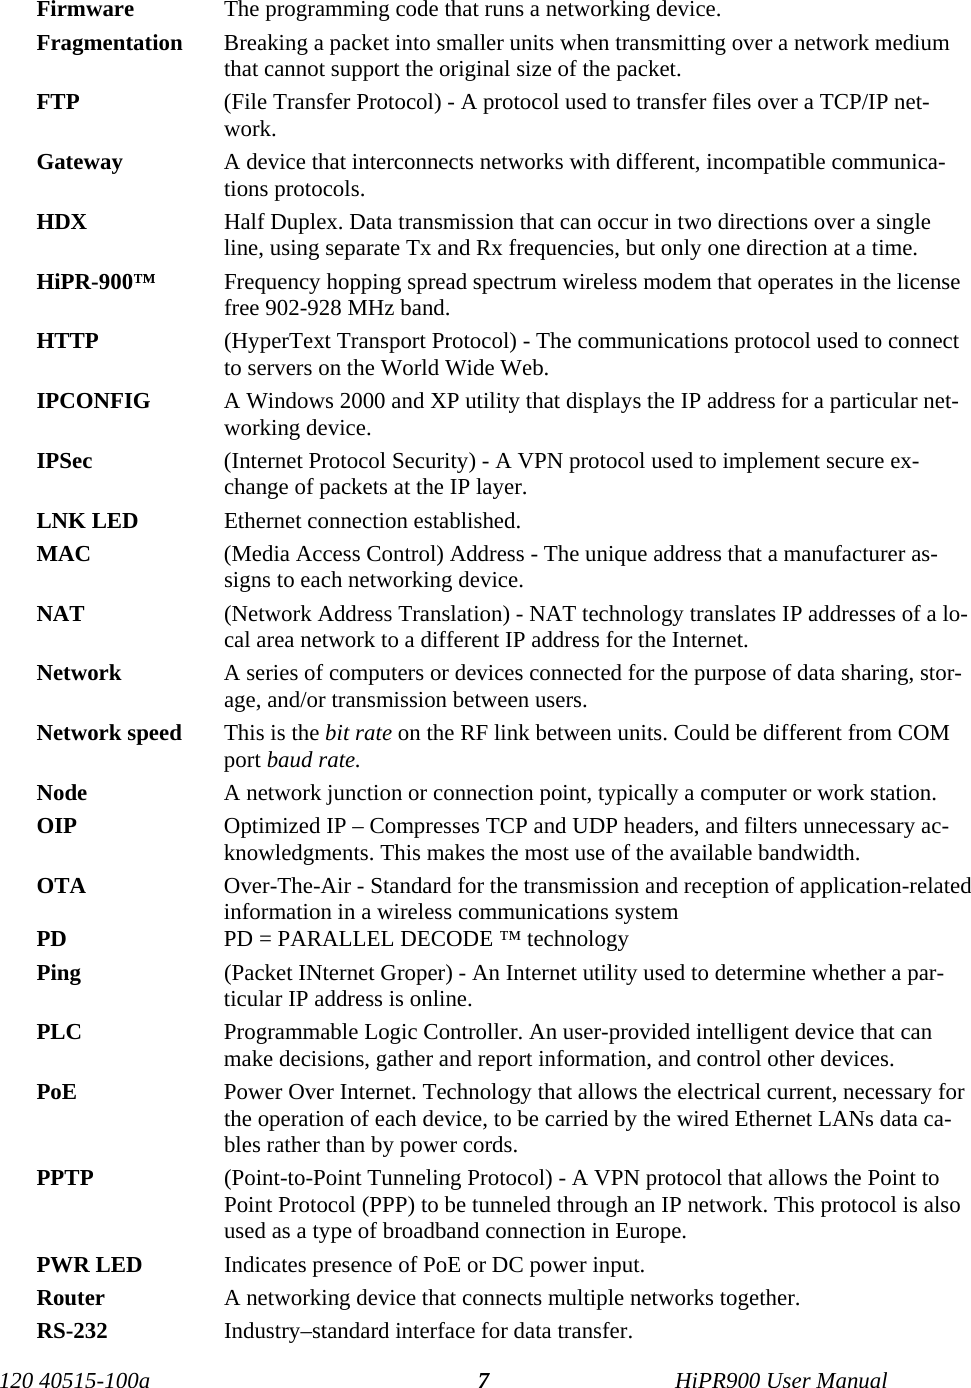  Firmware   The programming code that runs a networking device. Fragmentation  Breaking a packet into smaller units when transmitting over a network medium that cannot support the original size of the packet. FTP   (File Transfer Protocol) - A protocol used to transfer files over a TCP/IP net-work. Gateway   A device that interconnects networks with different, incompatible communica-tions protocols. HDX  Half Duplex. Data transmission that can occur in two directions over a single line, using separate Tx and Rx frequencies, but only one direction at a time. HiPR-900™  Frequency hopping spread spectrum wireless modem that operates in the license free 902-928 MHz band. HTTP   (HyperText Transport Protocol) - The communications protocol used to connect to servers on the World Wide Web. IPCONFIG   A Windows 2000 and XP utility that displays the IP address for a particular net-working device. IPSec   (Internet Protocol Security) - A VPN protocol used to implement secure ex-change of packets at the IP layer. LNK LED  Ethernet connection established. MAC   (Media Access Control) Address - The unique address that a manufacturer as-signs to each networking device. NAT   (Network Address Translation) - NAT technology translates IP addresses of a lo-cal area network to a different IP address for the Internet. Network   A series of computers or devices connected for the purpose of data sharing, stor-age, and/or transmission between users. Network speed  This is the bit rate on the RF link between units. Could be different from COM port baud rate. Node   A network junction or connection point, typically a computer or work station. OIP  Optimized IP – Compresses TCP and UDP headers, and filters unnecessary ac-knowledgments. This makes the most use of the available bandwidth. OTA  Over-The-Air - Standard for the transmission and reception of application-related information in a wireless communications system PD  PD = PARALLEL DECODE ™ technology Ping   (Packet INternet Groper) - An Internet utility used to determine whether a par-ticular IP address is online. PLC  Programmable Logic Controller. An user-provided intelligent device that can make decisions, gather and report information, and control other devices. PoE  Power Over Internet. Technology that allows the electrical current, necessary for the operation of each device, to be carried by the wired Ethernet LANs data ca-bles rather than by power cords. PPTP   (Point-to-Point Tunneling Protocol) - A VPN protocol that allows the Point to Point Protocol (PPP) to be tunneled through an IP network. This protocol is also used as a type of broadband connection in Europe. PWR LED  Indicates presence of PoE or DC power input. Router   A networking device that connects multiple networks together. RS-232  Industry–standard interface for data transfer.  120 40515-100a   HiPR900 User Manual 7